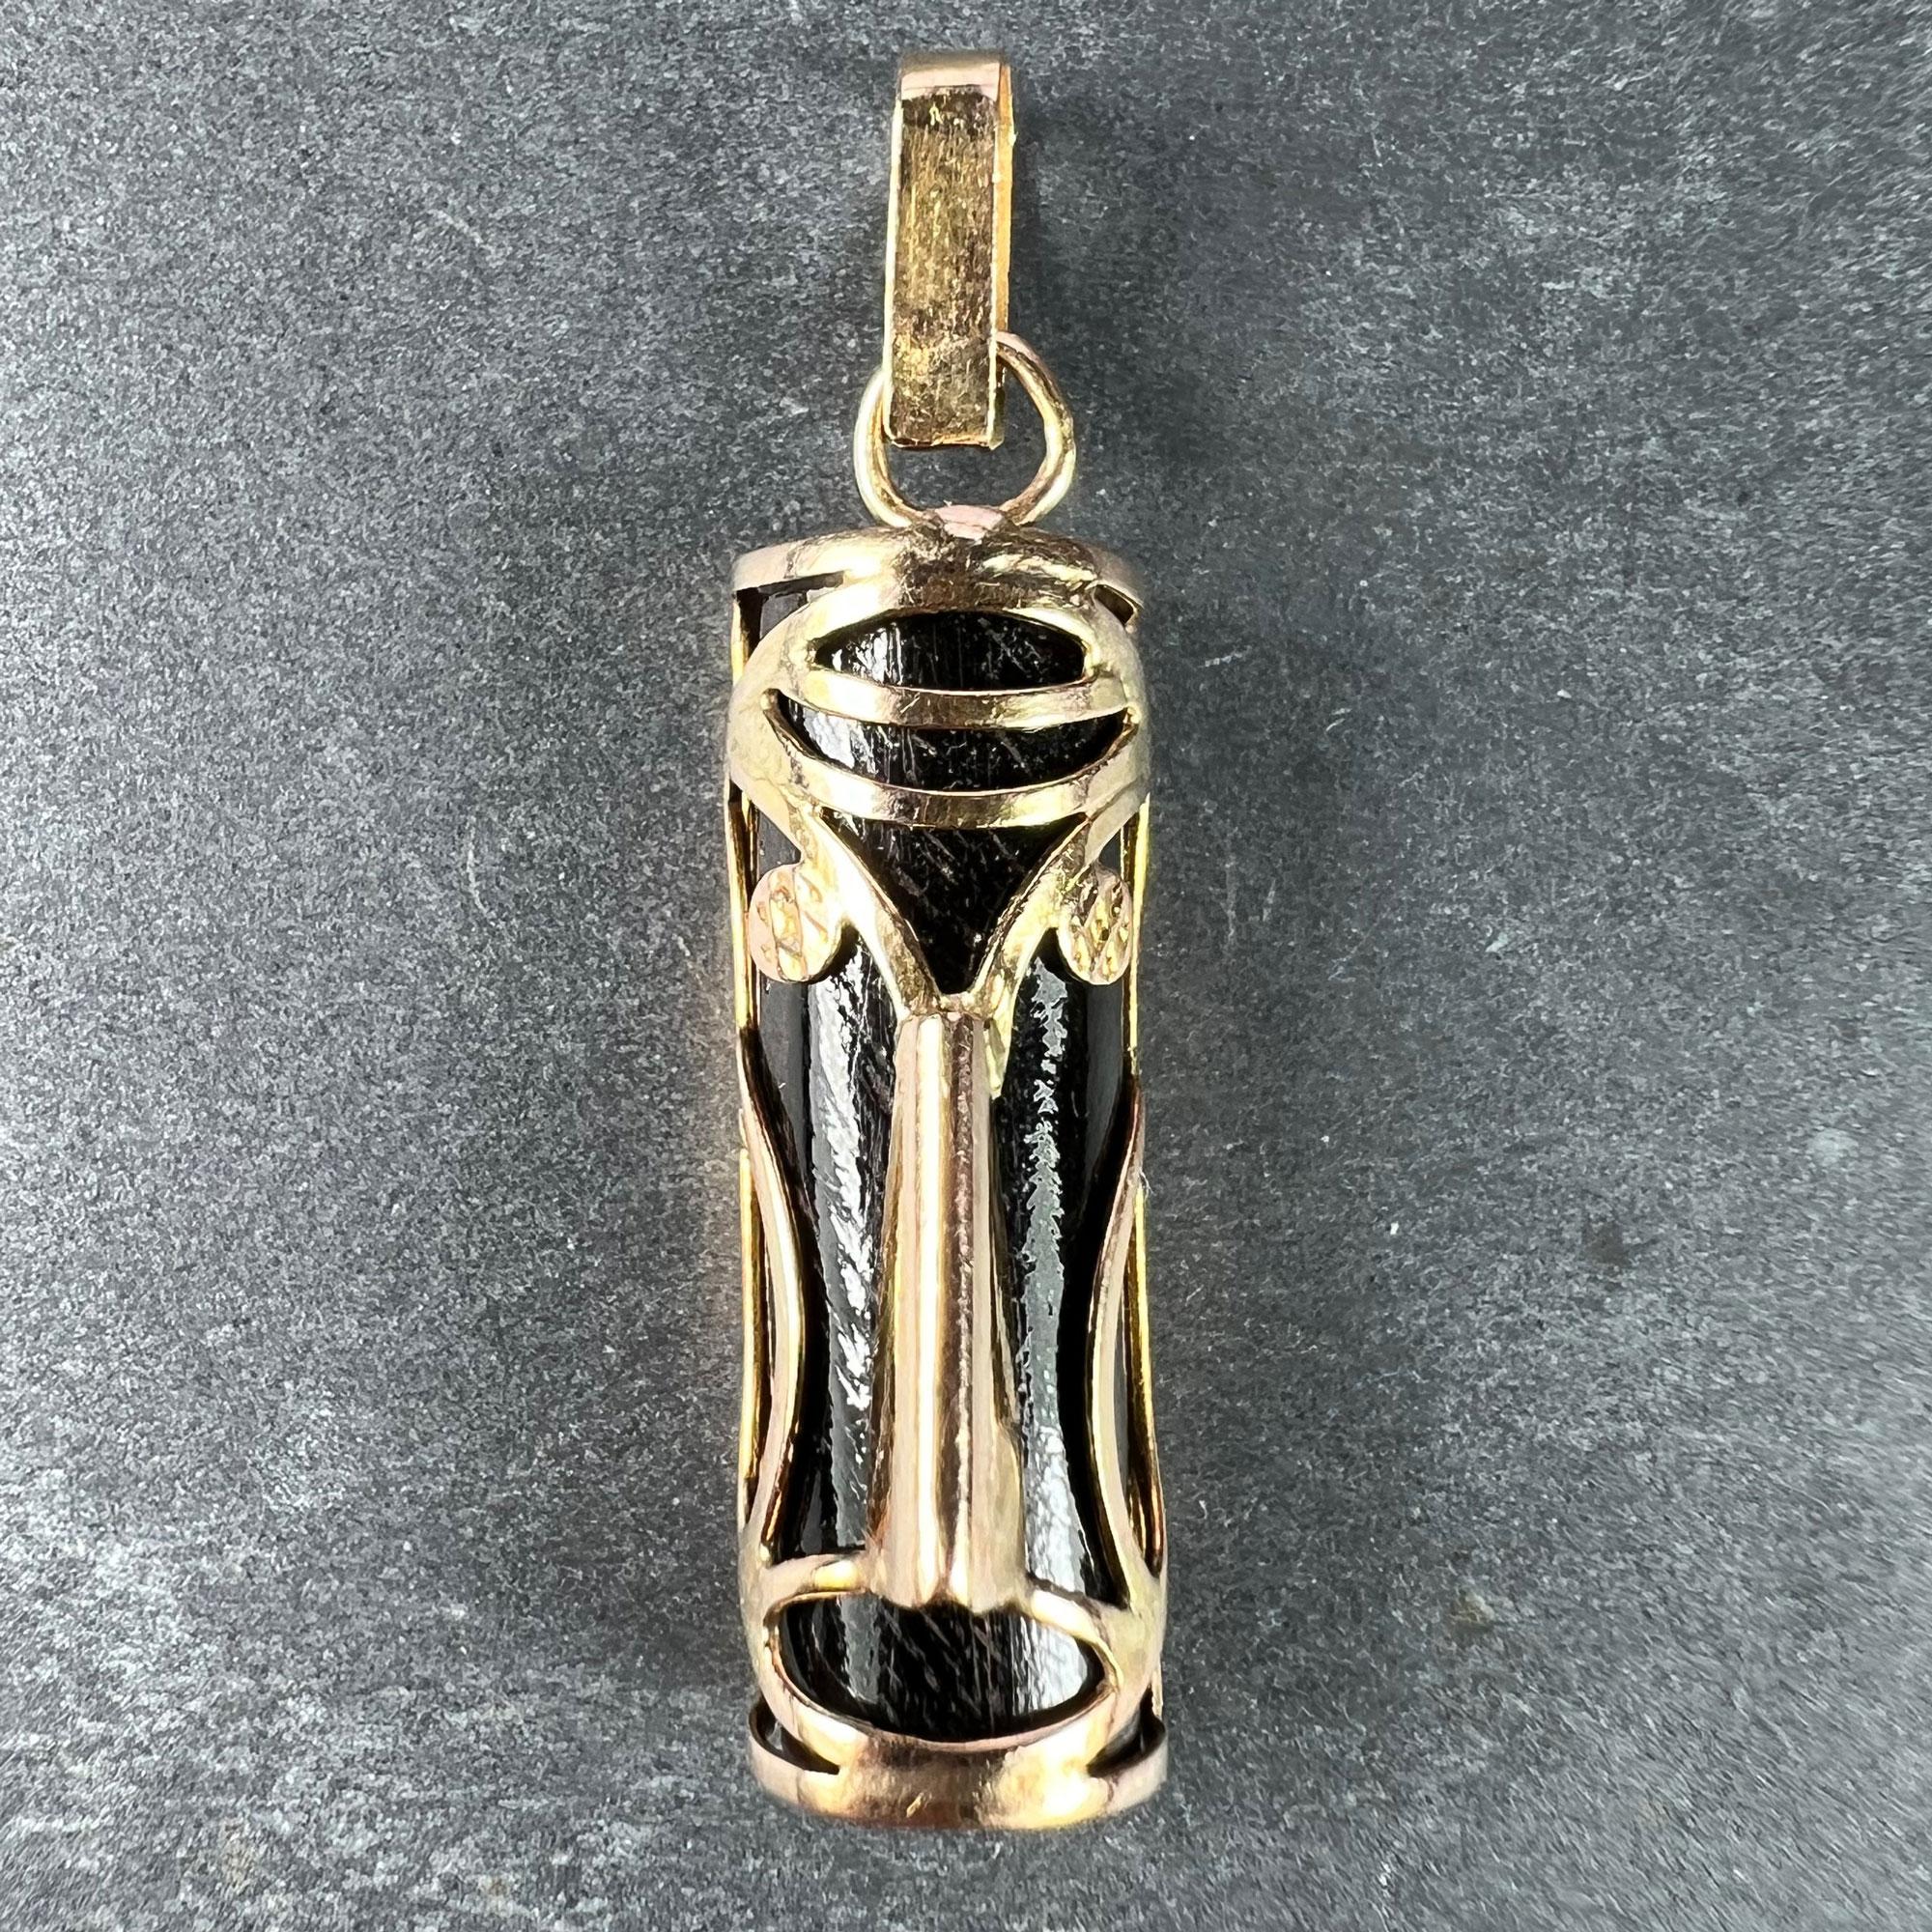 A 14 karat (14K) rose gold and dark wood lucky charm pendant designed as a Hawaiian or Maori Tiki mask in rose gold wire over a half-cylinder of dark wood for the good luck aspect of the Touch Wood theme. Unmarked but tested for 14 karat gold.